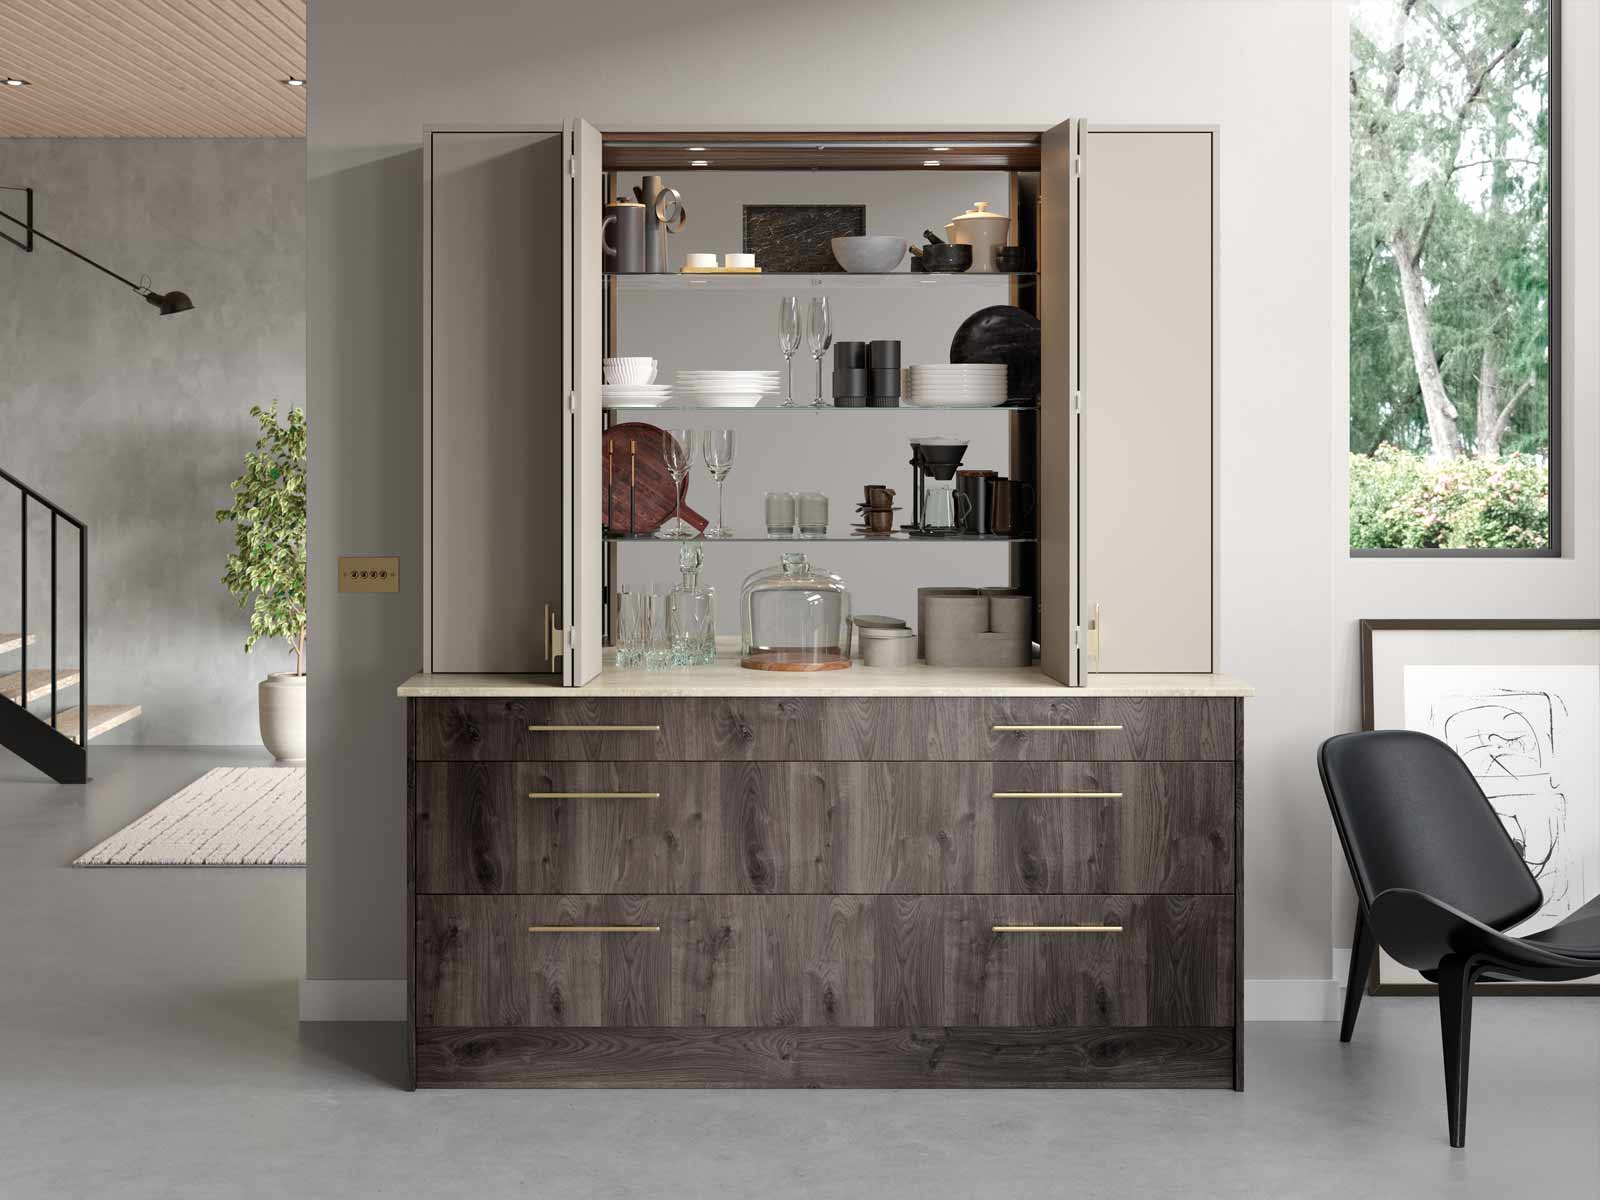 A stylish countertop wall cabinet with mirrors, crockery and glassware